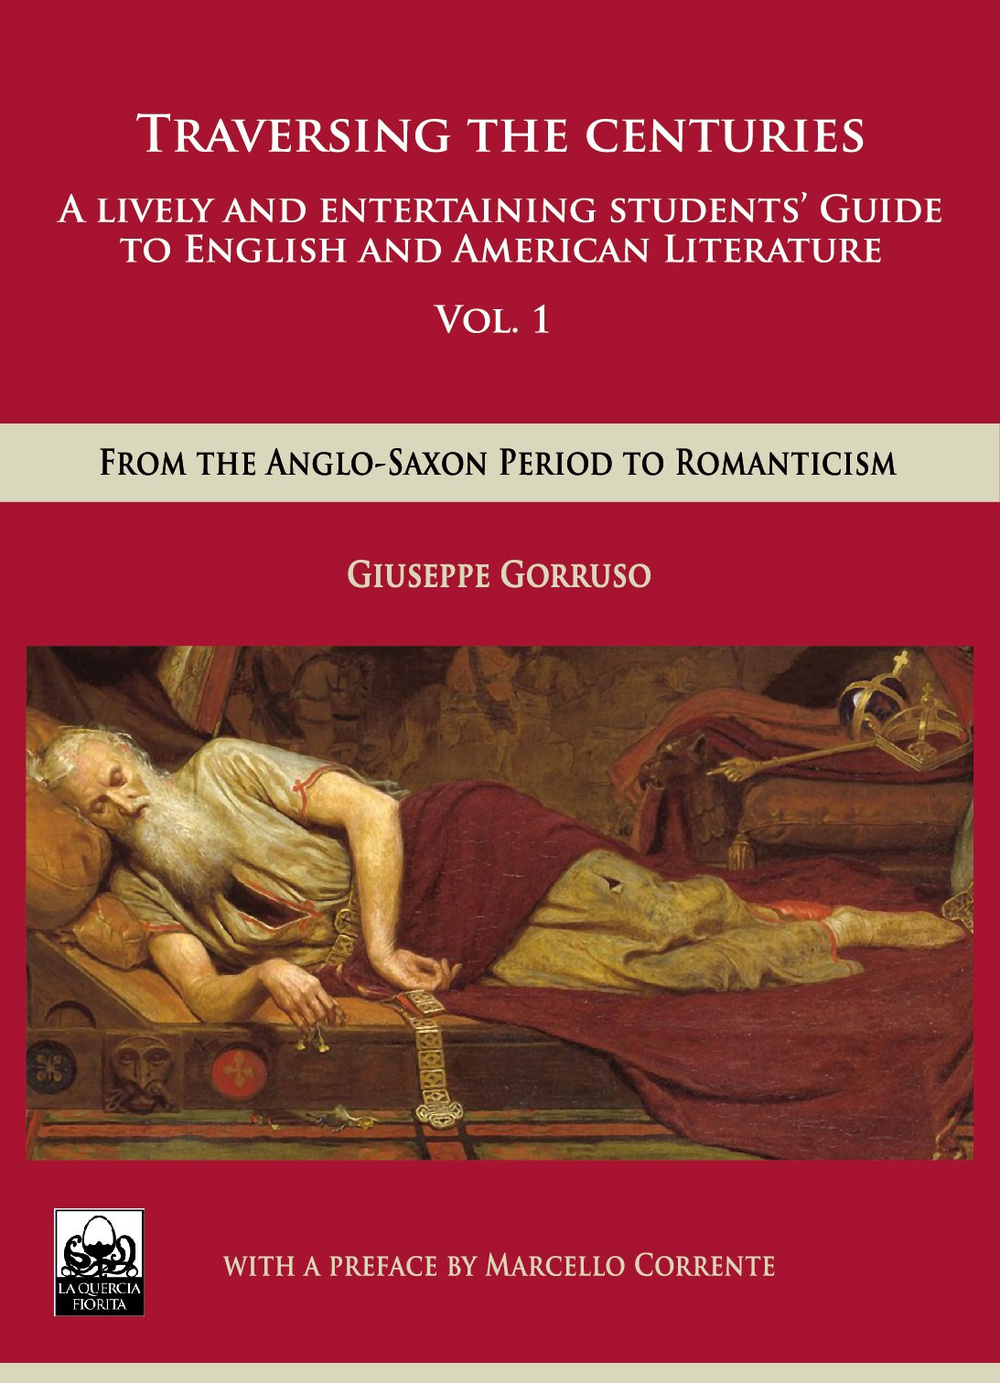 Traversing the centuries. A lively and entertaining guide to english and american literature. Vol. 1: From the anglo-saxon period to romanticism